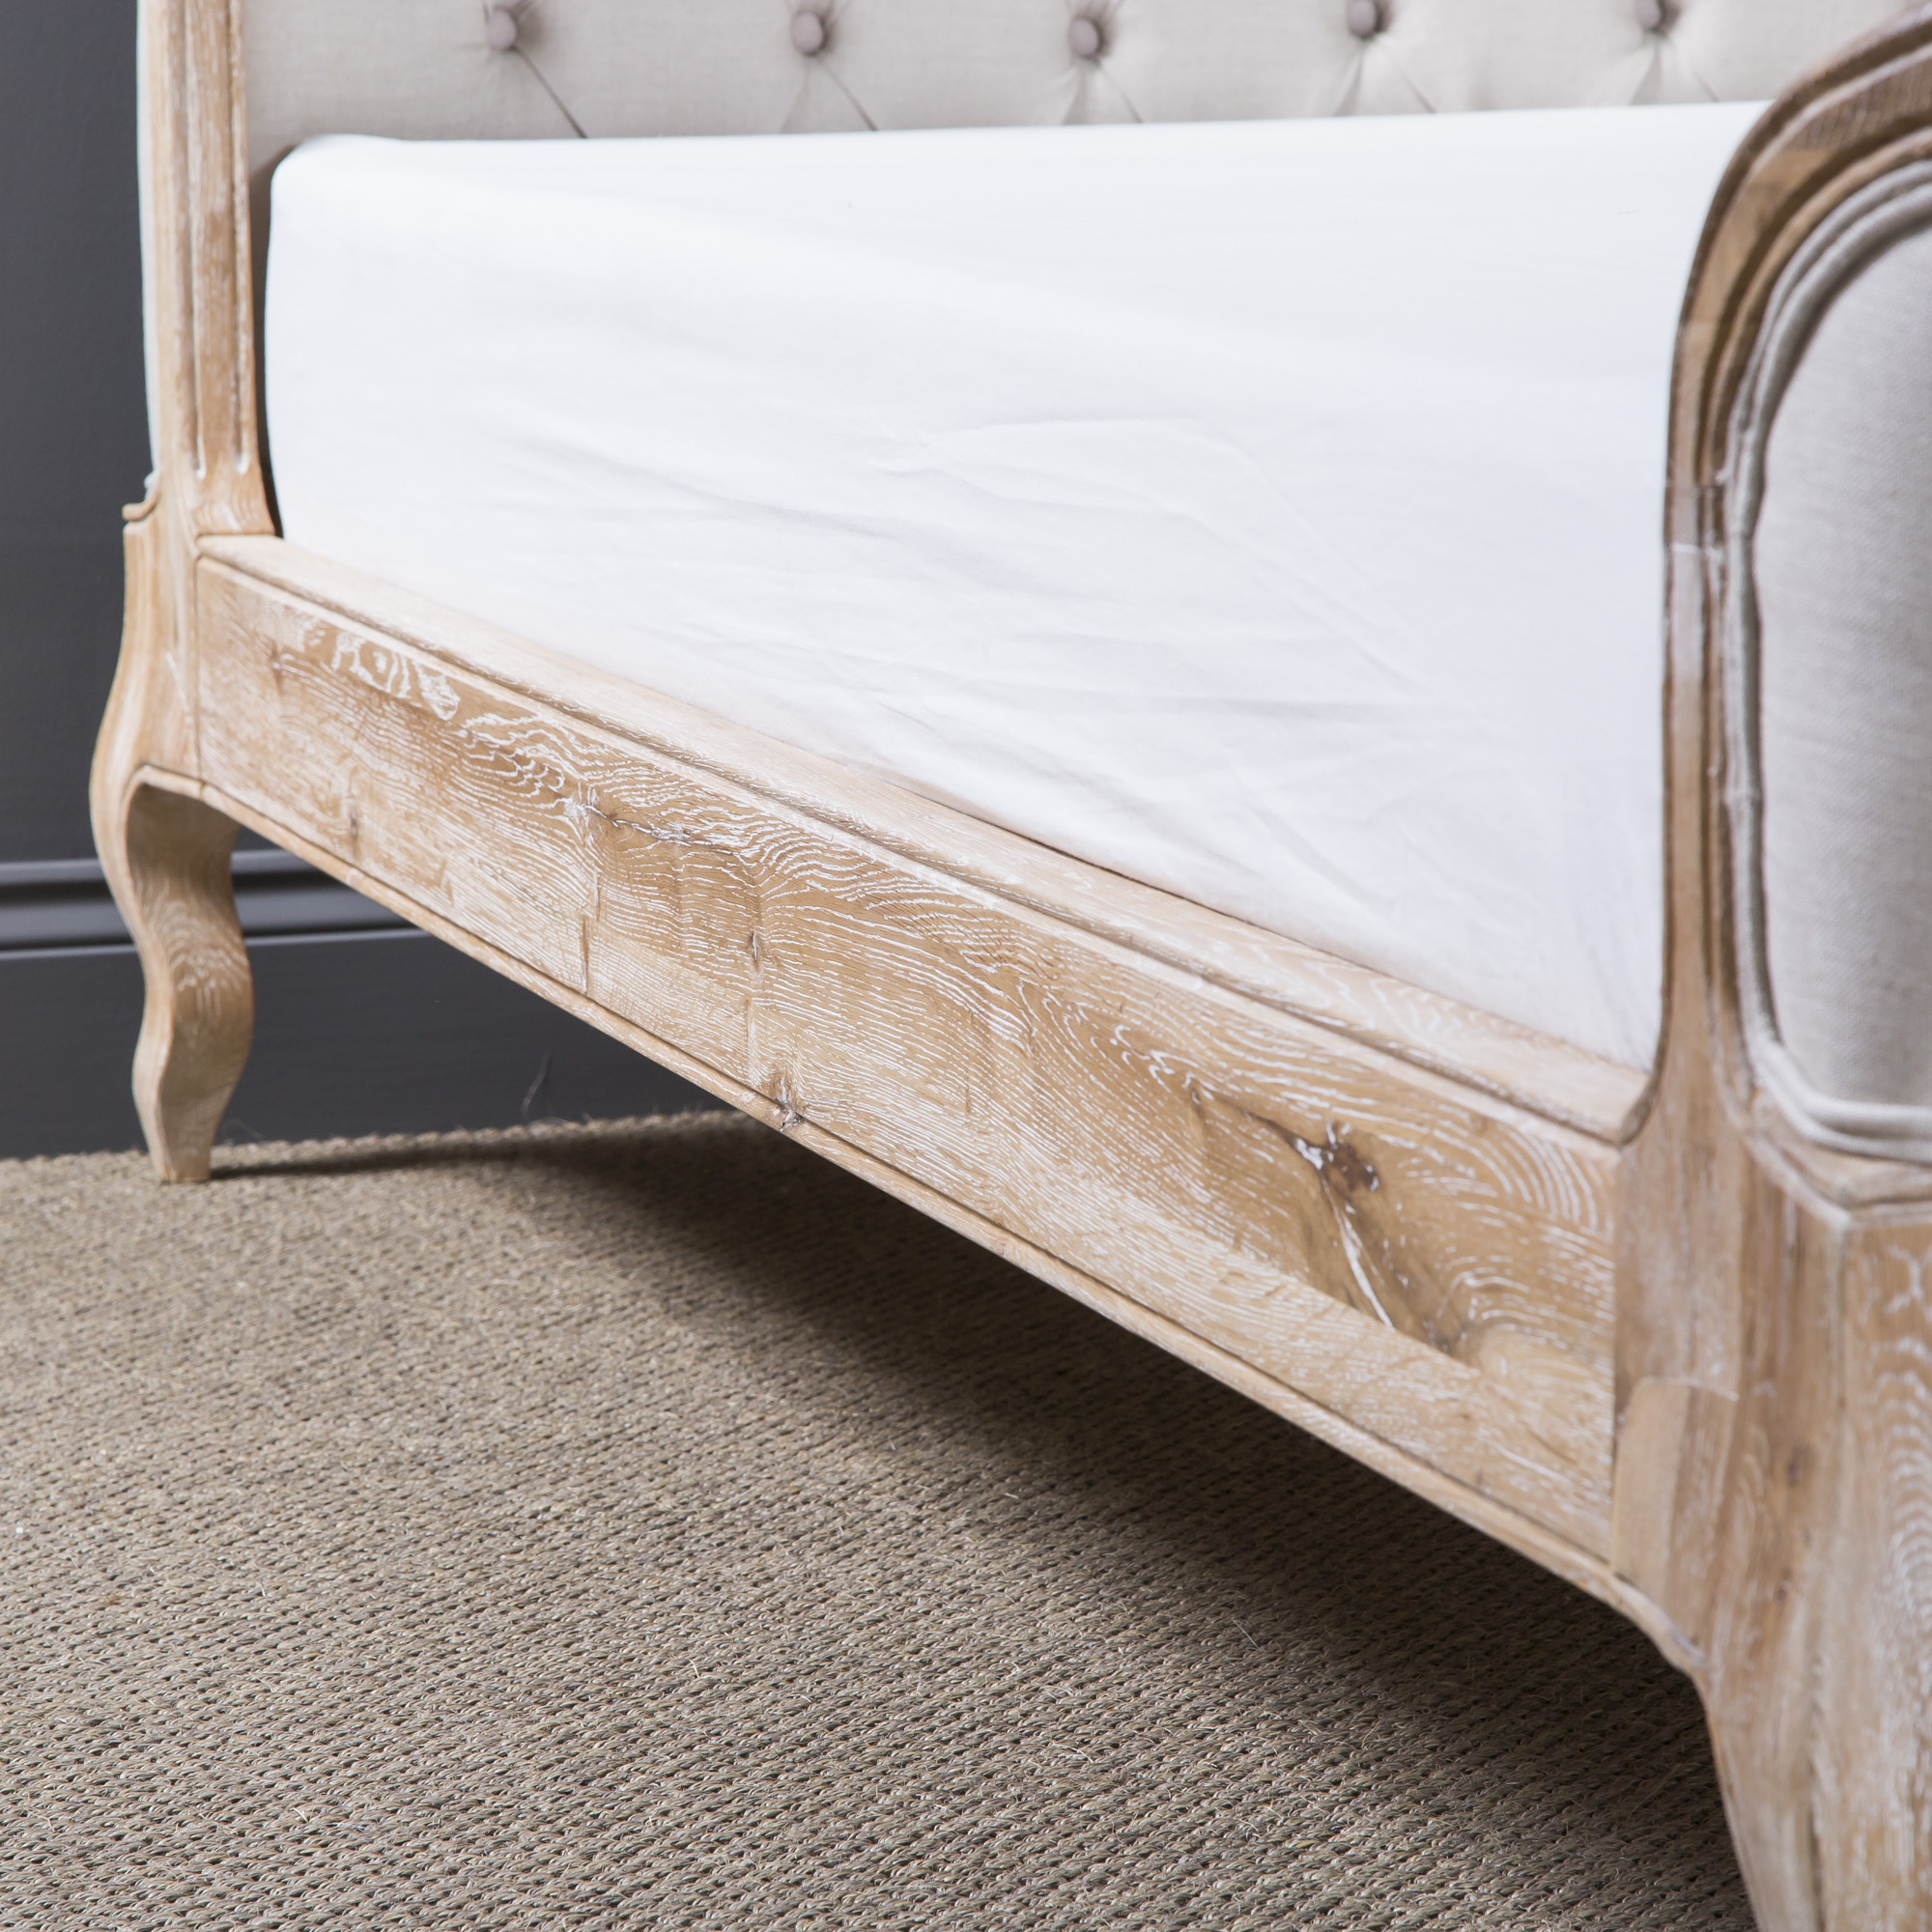 Josephine French Curved Weathered Whitewash Oak Upholstered Low Foot Board Bed – Super King Size